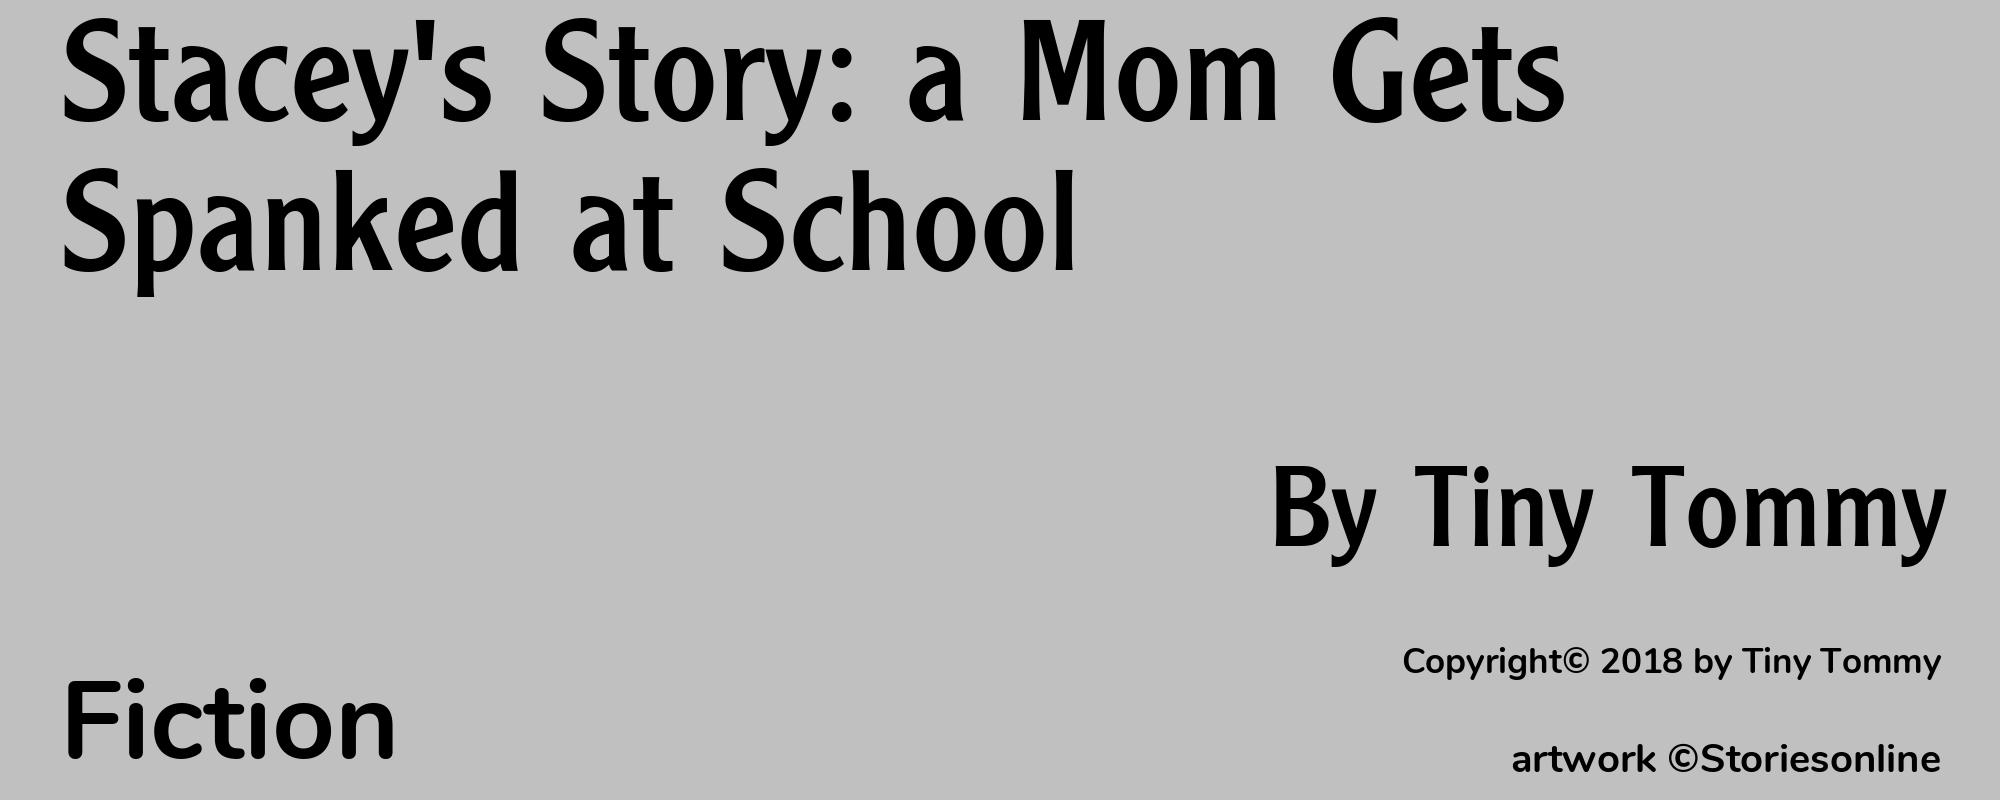 Stacey's Story: a Mom Gets Spanked at School - Cover